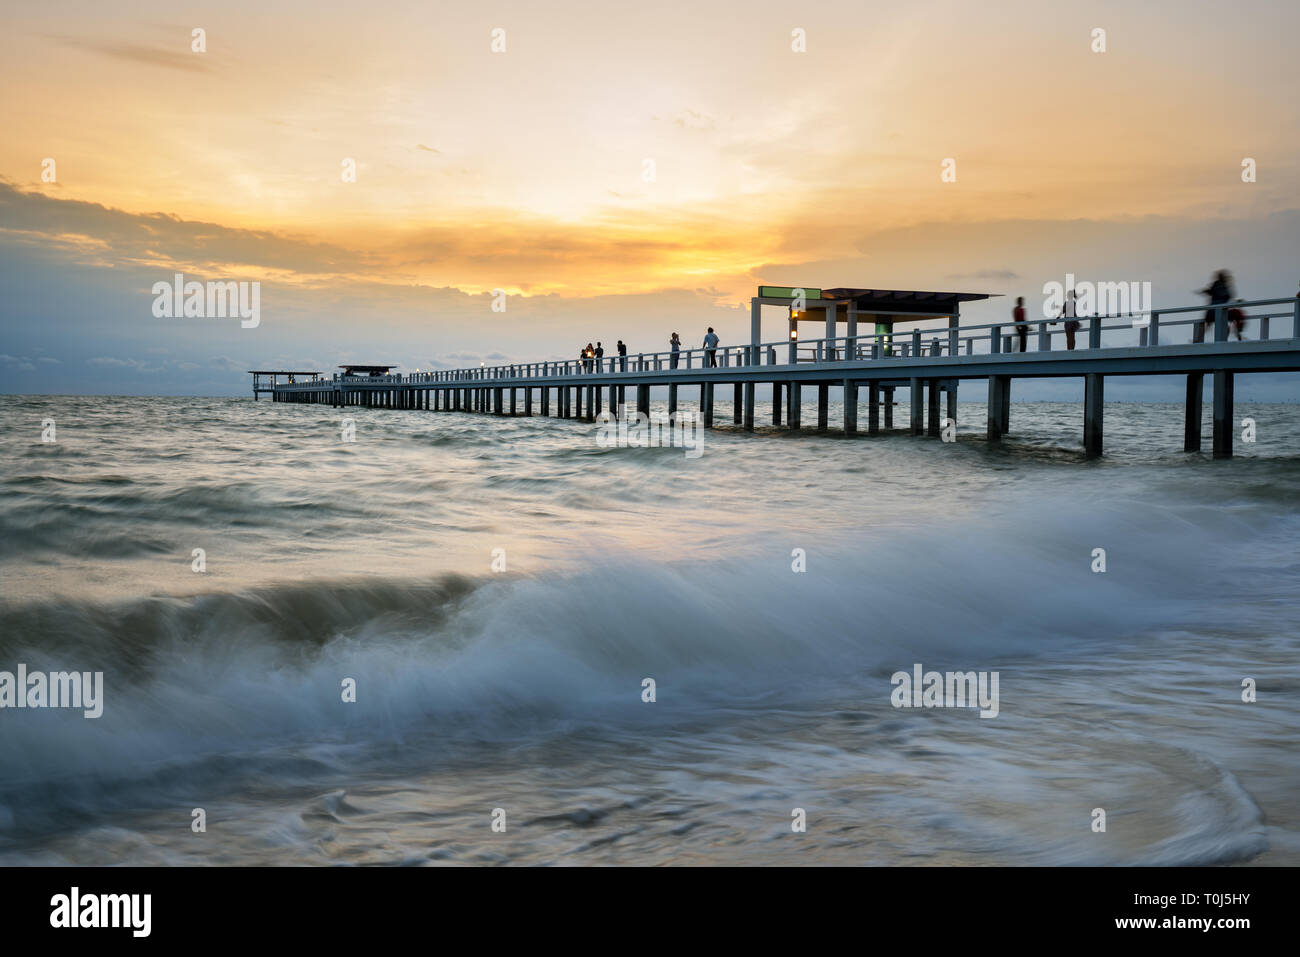 Wooden pier between sunset in Phuket, Thailand. Summer, Travel, Vacation and Holiday concept. Stock Photo